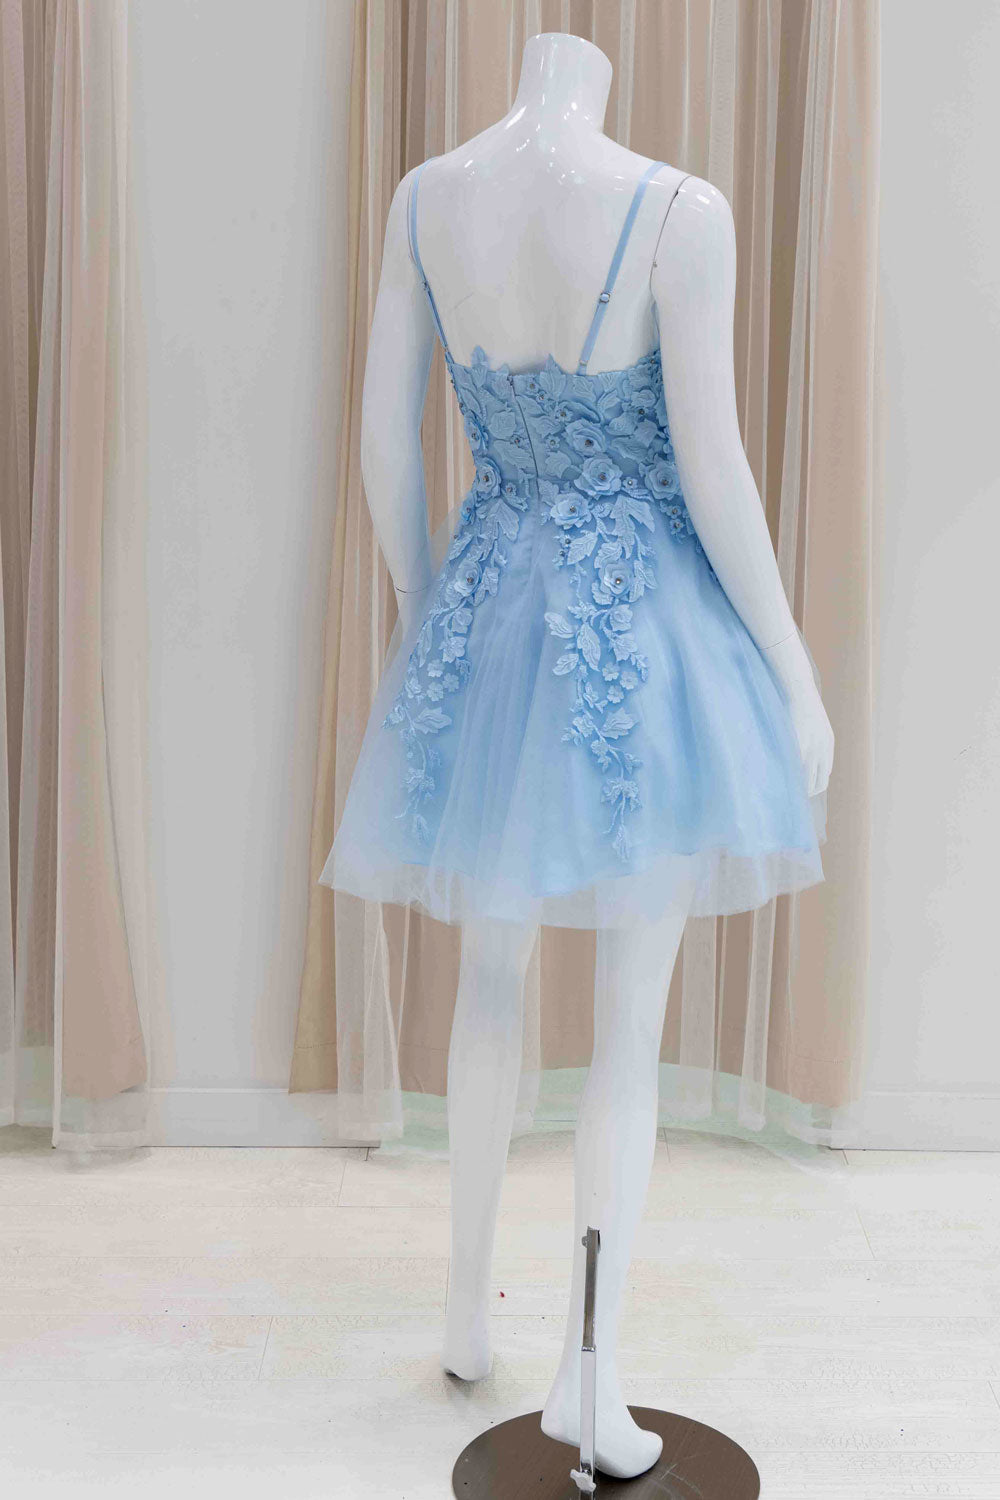 Light Blue Short Fit and Flare Party Dress for Graduation